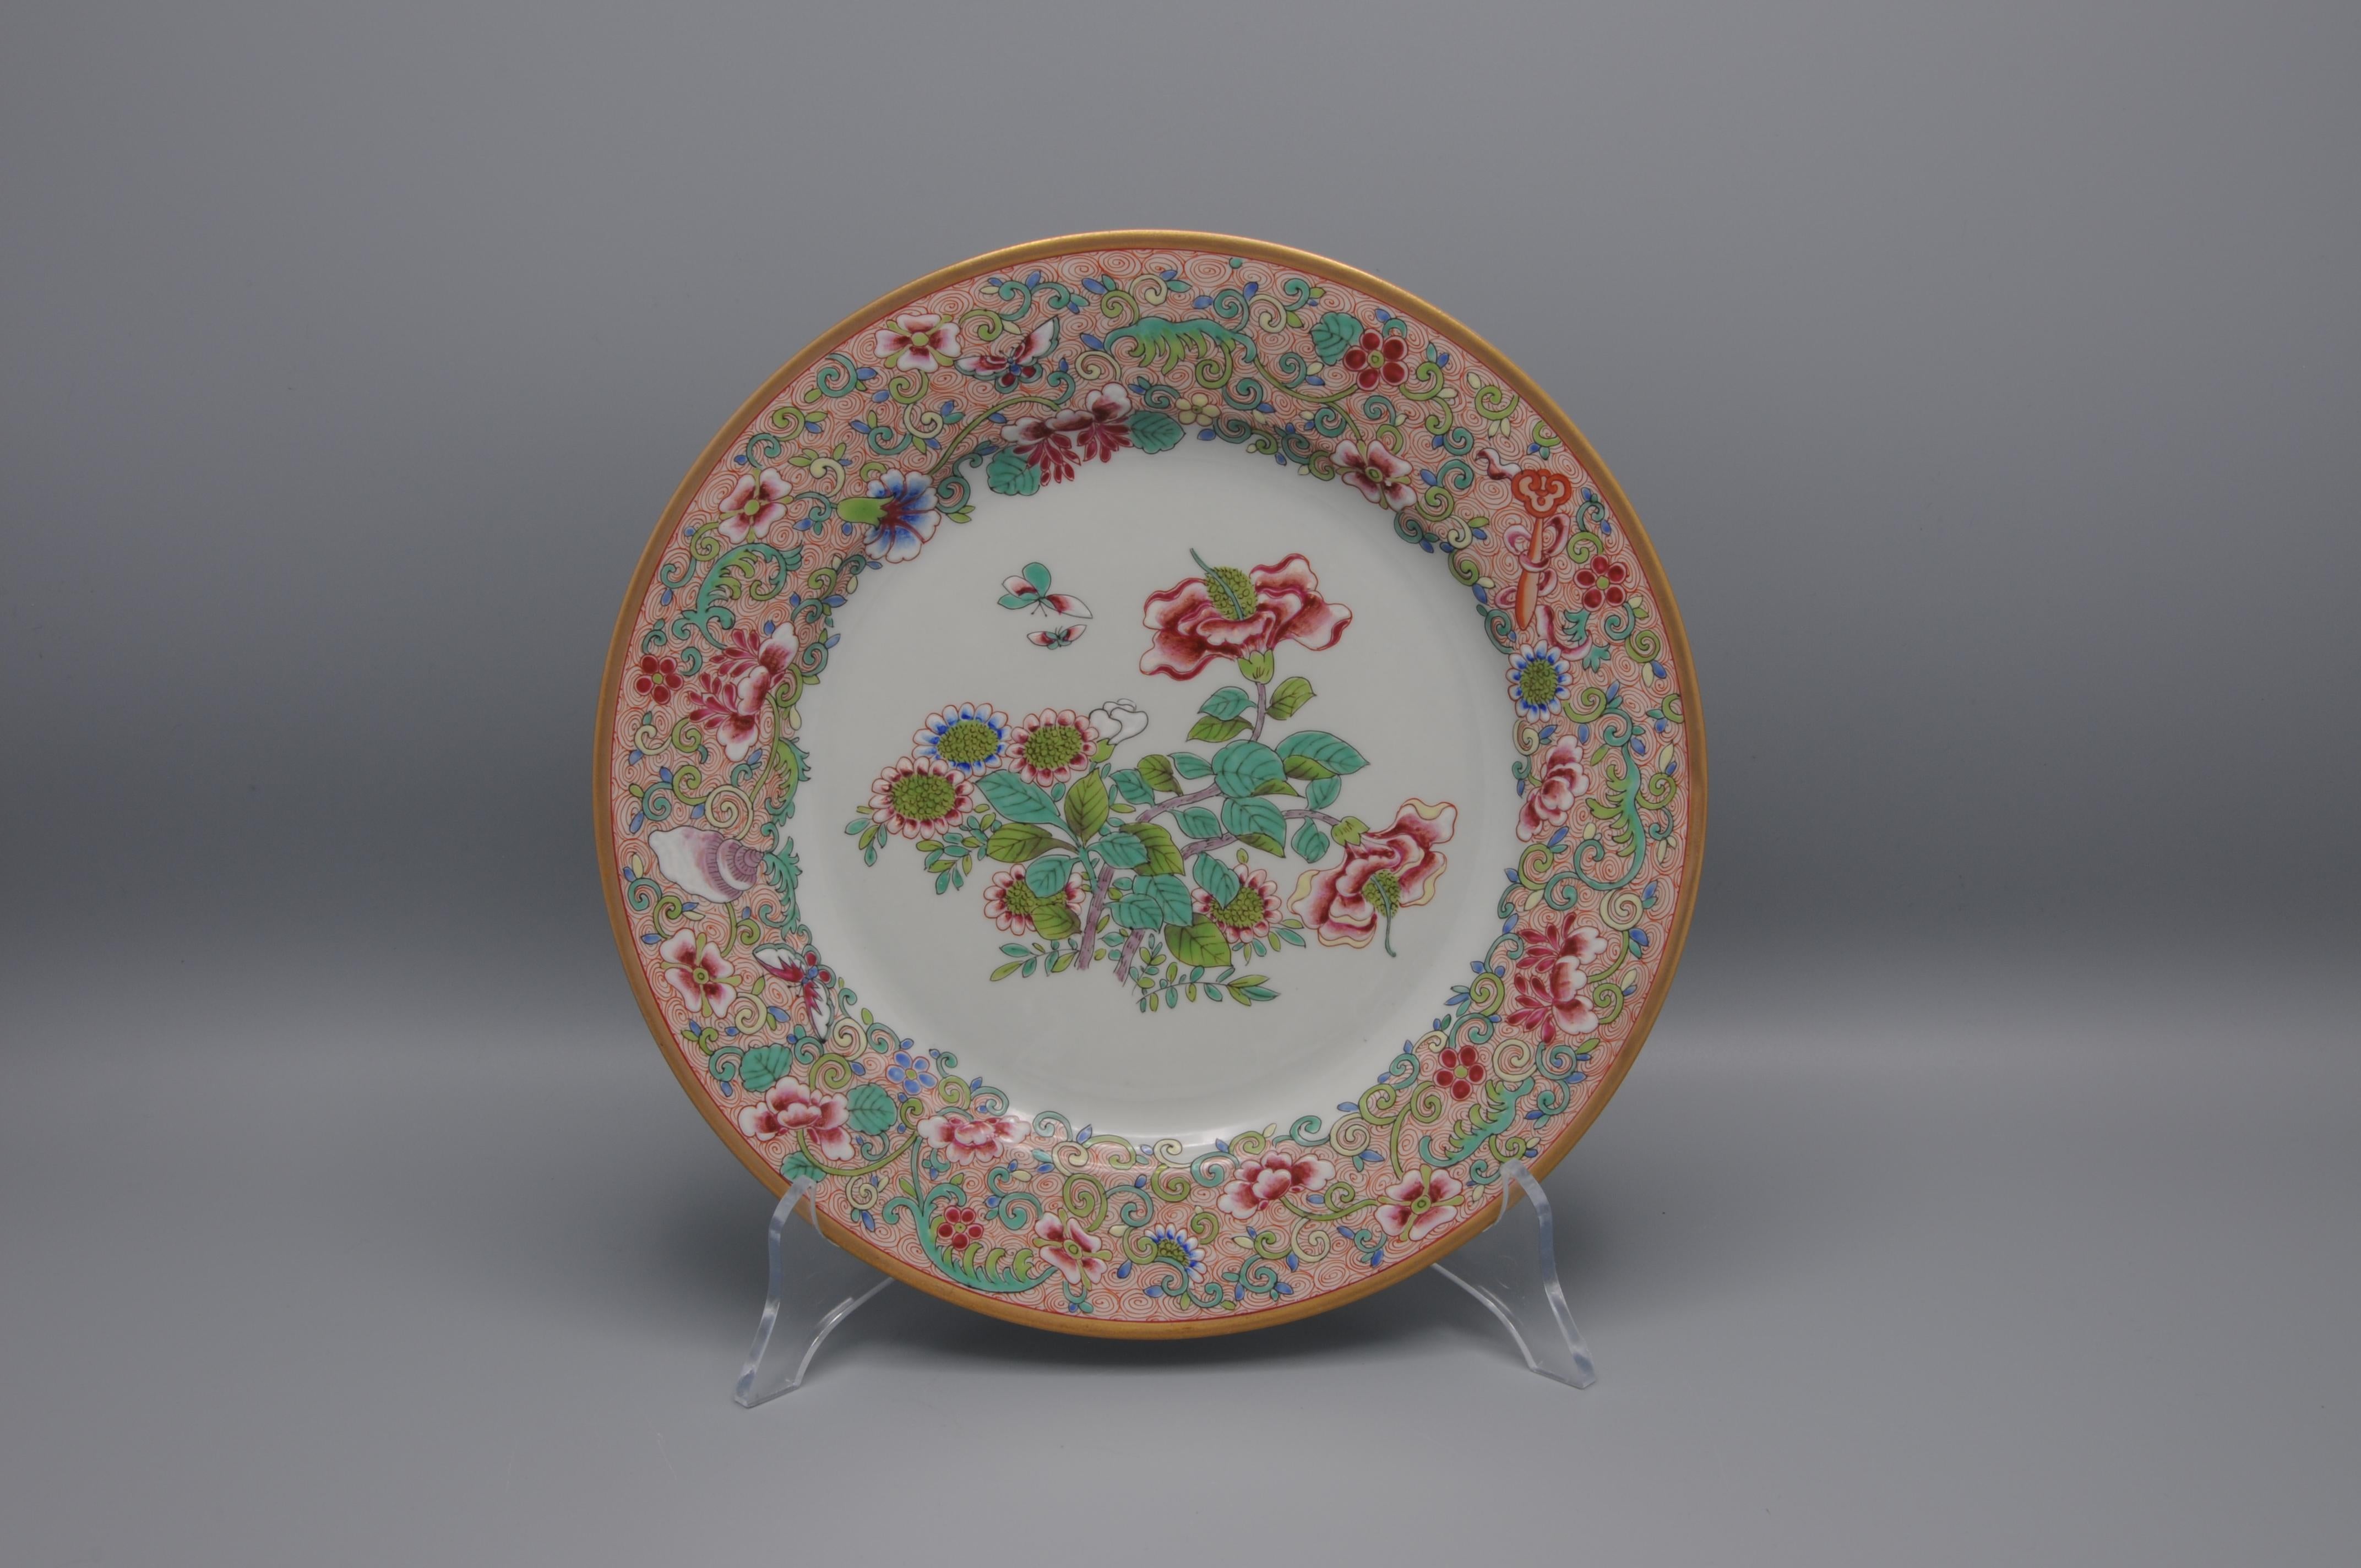 Famille rose plate by Porcelaine de Paris. Attractive handpainted Chinese style decoration of flowers and foliage, comprising shells and butterflies. 

Unmarked.

Perfect condition.